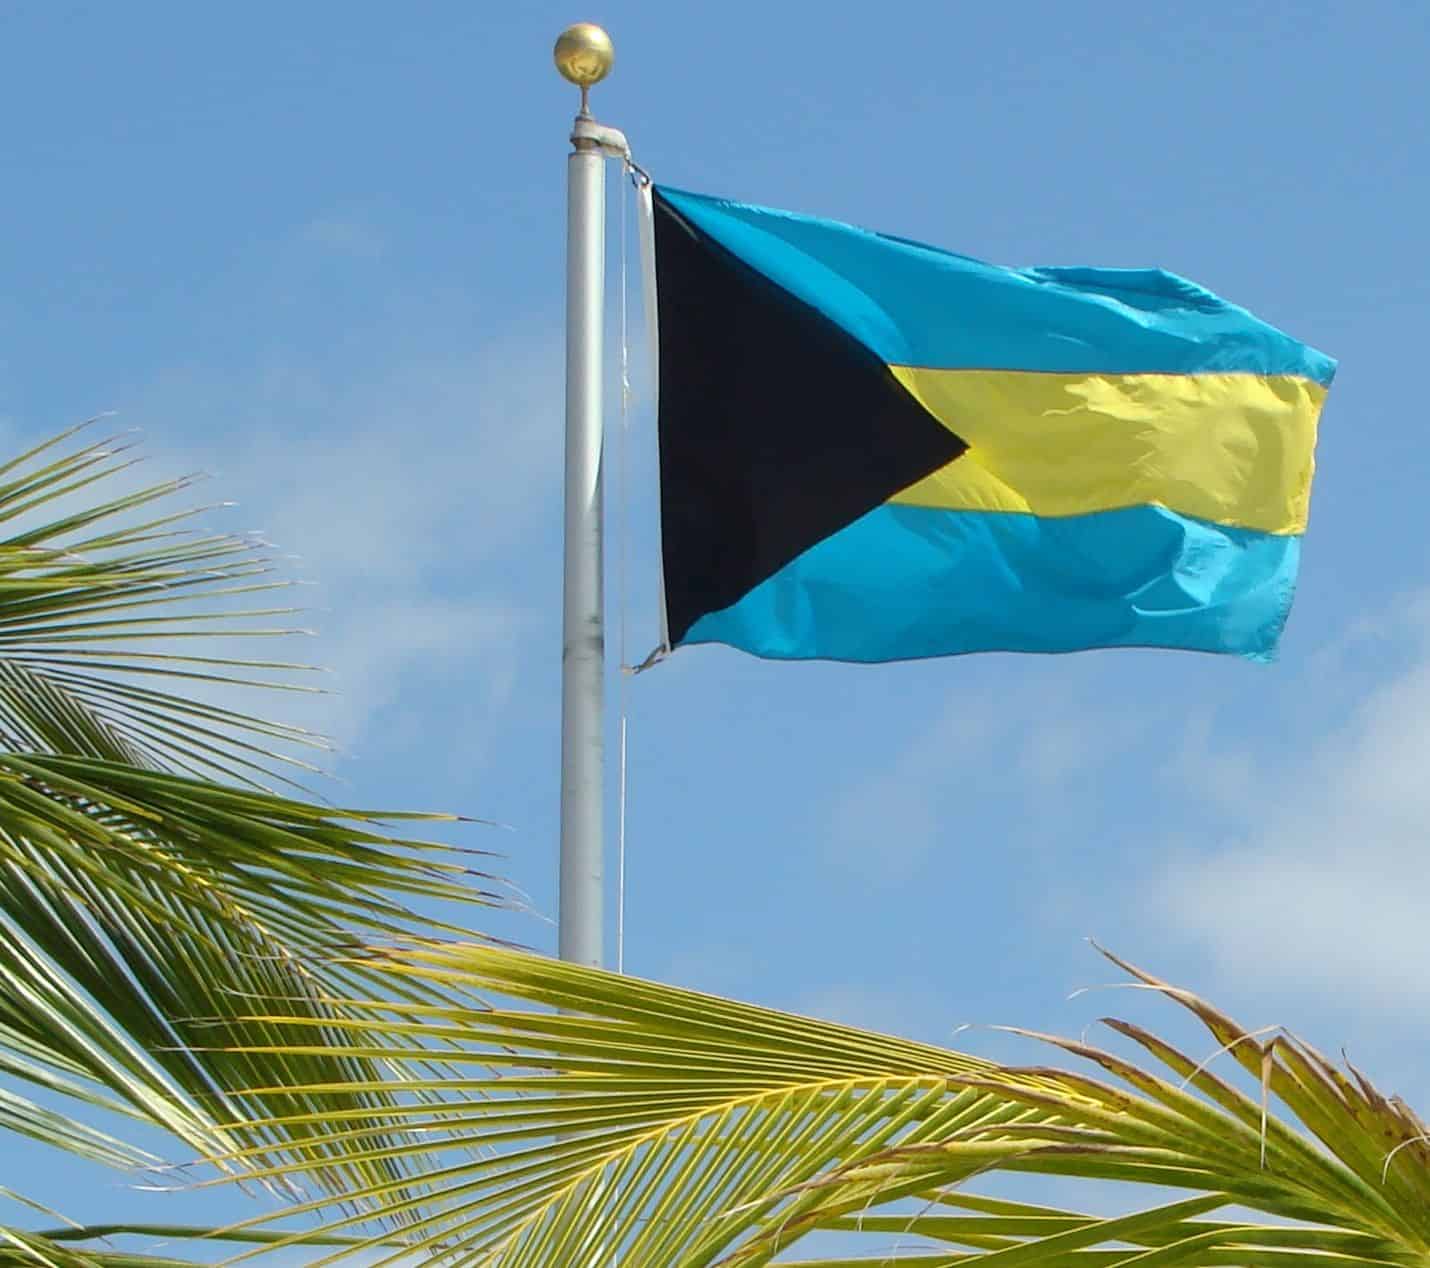 Bahamian flag with blue skies and palm trees in the background